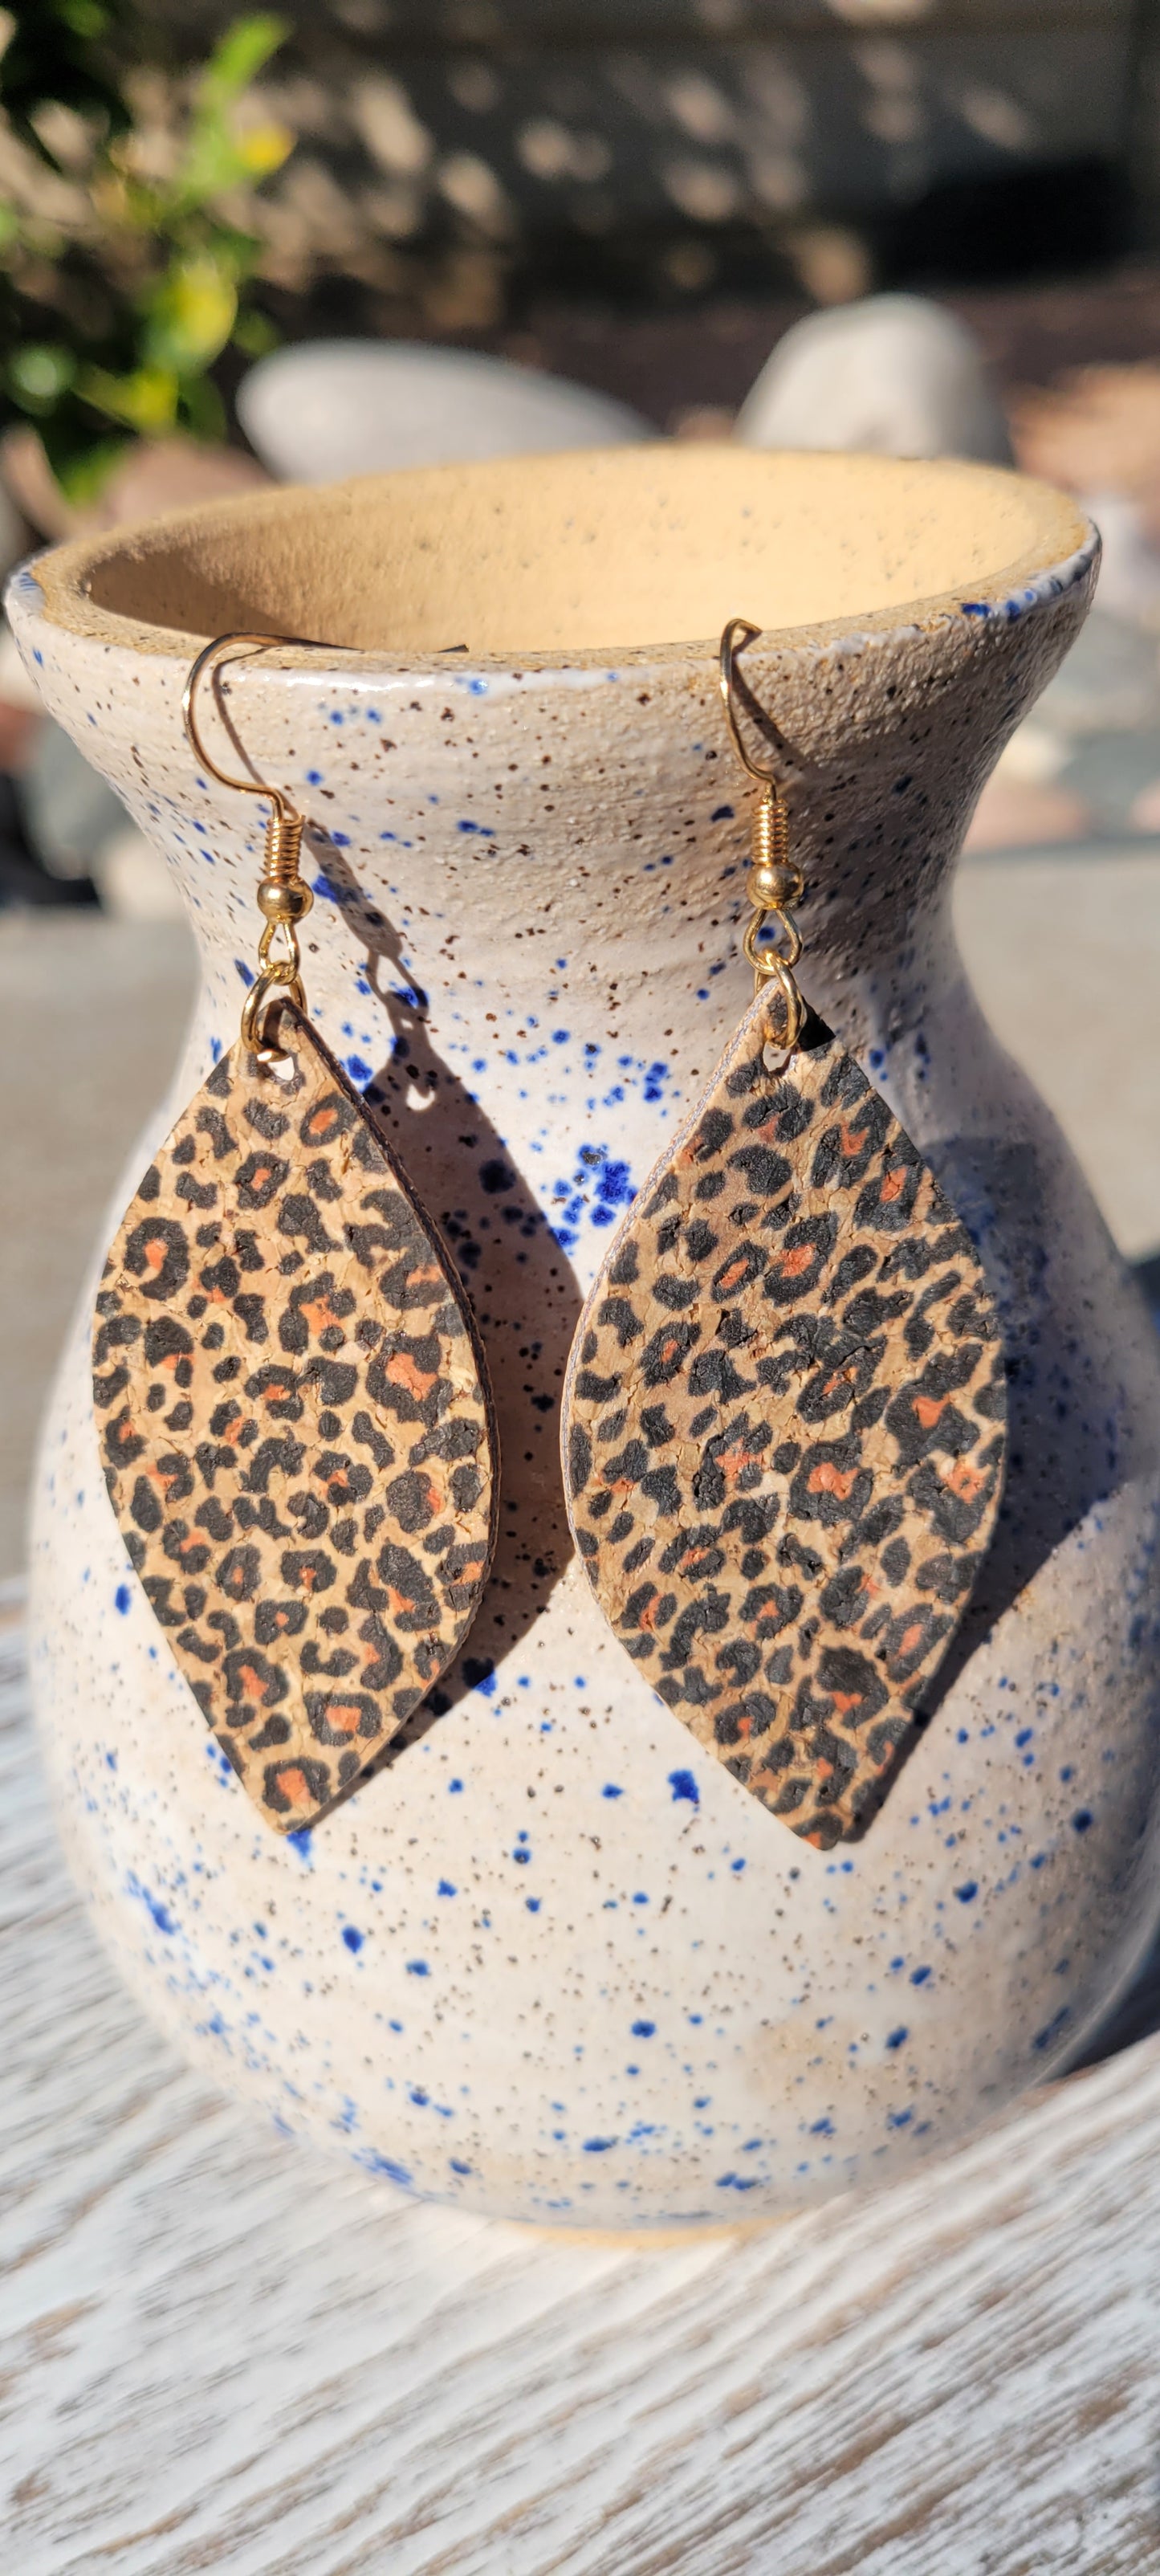 Marquise shape Leopard print cork Brushed gold fish hook dangle earrings Rubber earring back Drop length 3” Whether you want to be on the wild side or classy this earring set it will add a fun touch to your outfit